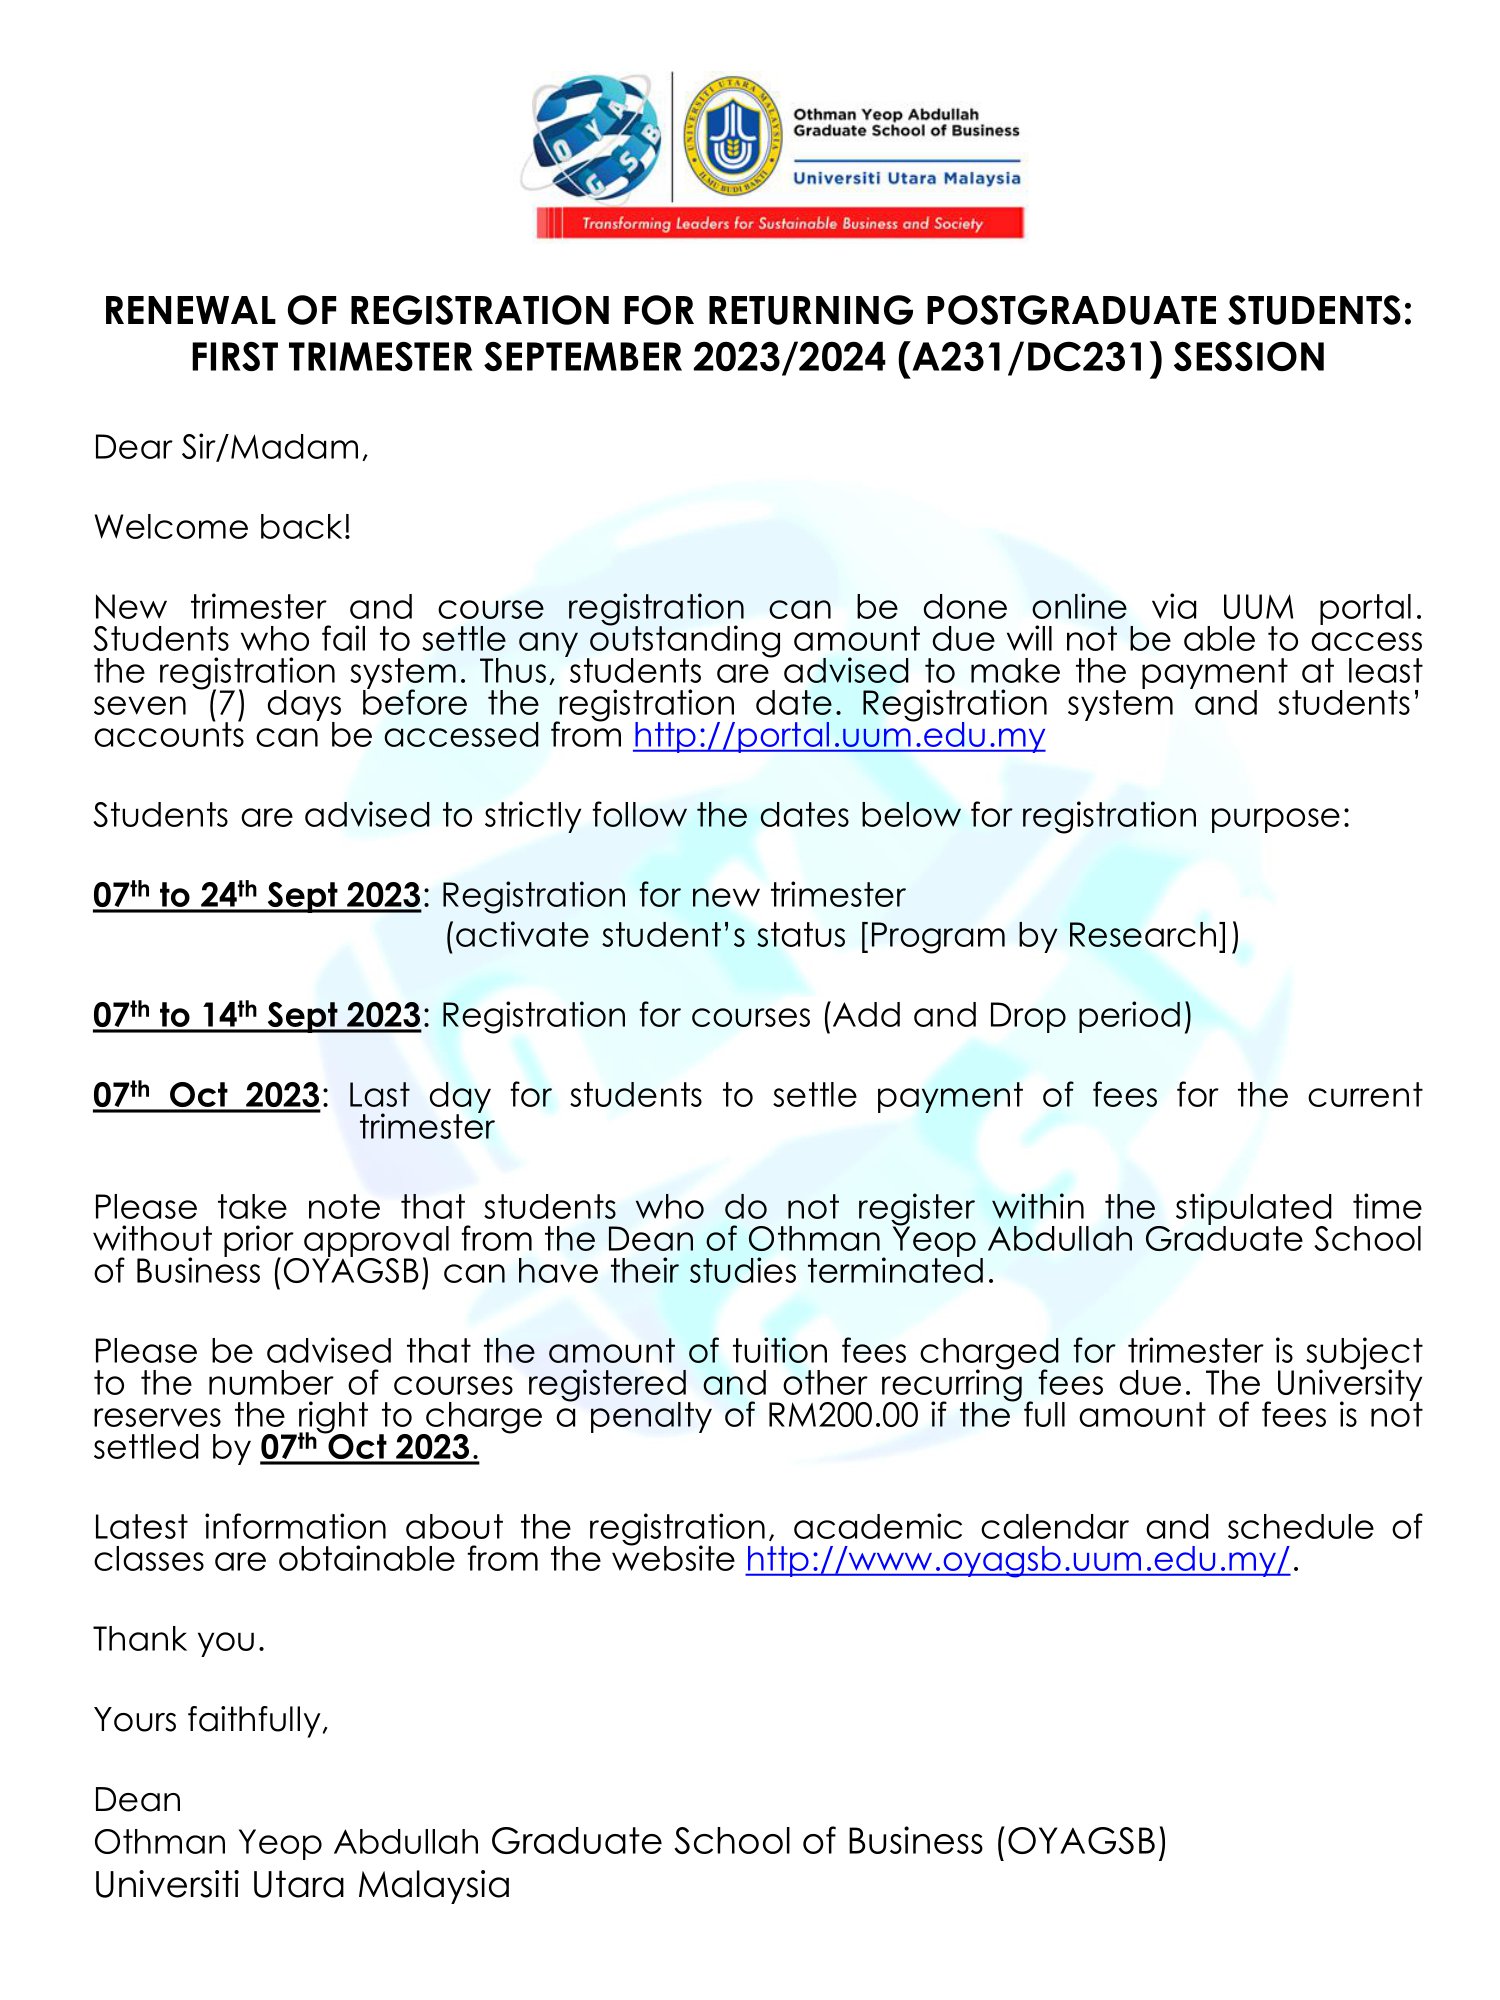 Notice of Renewal 231 Sept 2023